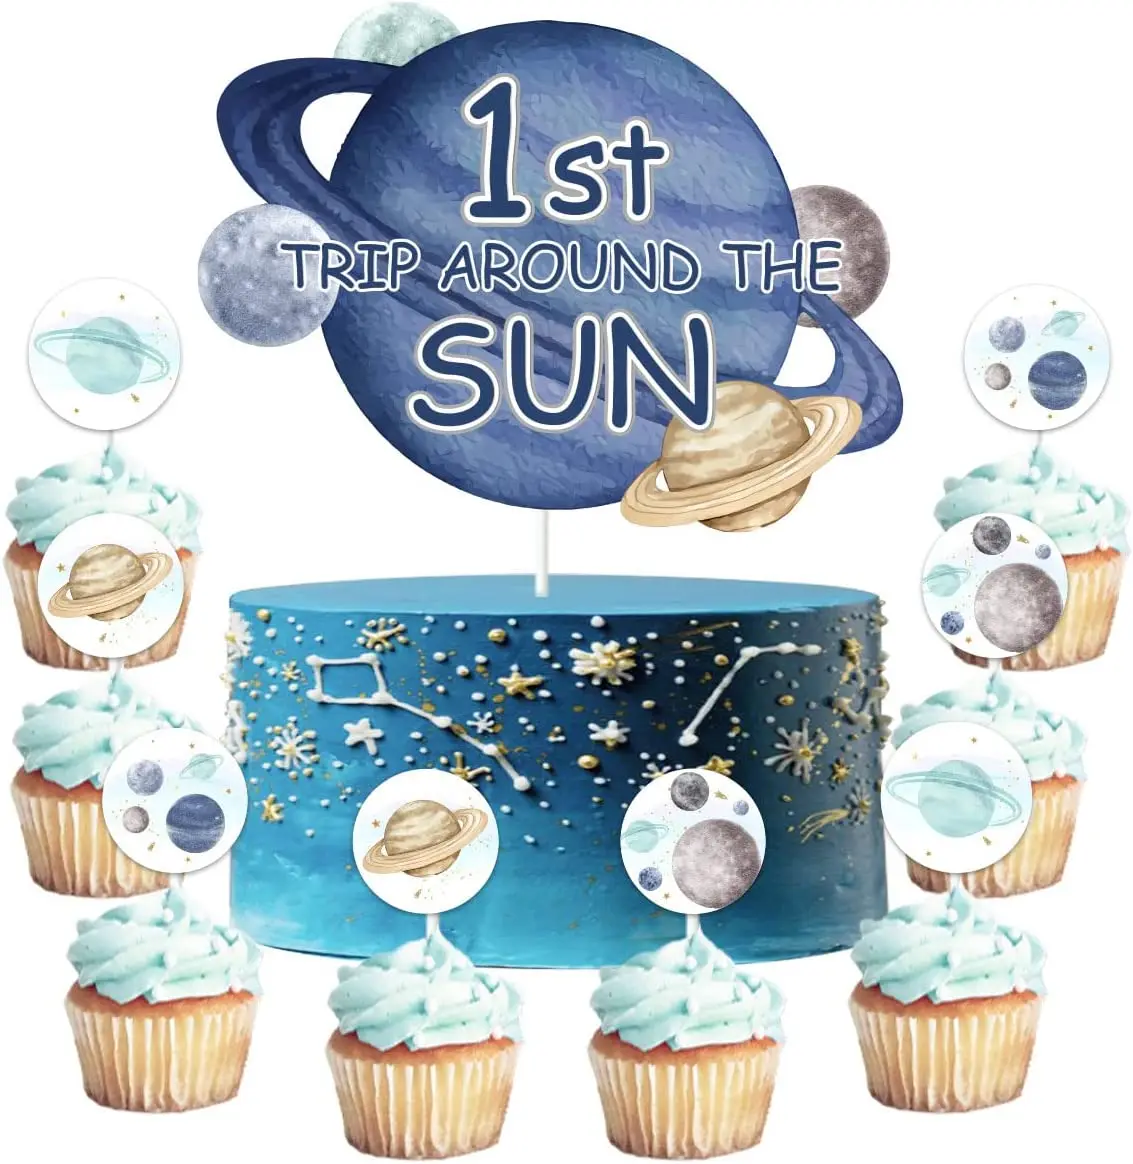 

25PCS First Trip Around The Sun Cake Topper and Outer Space Cupcake Toppers for Boys’ Galaxy Solar System 1st Birthday Supplies